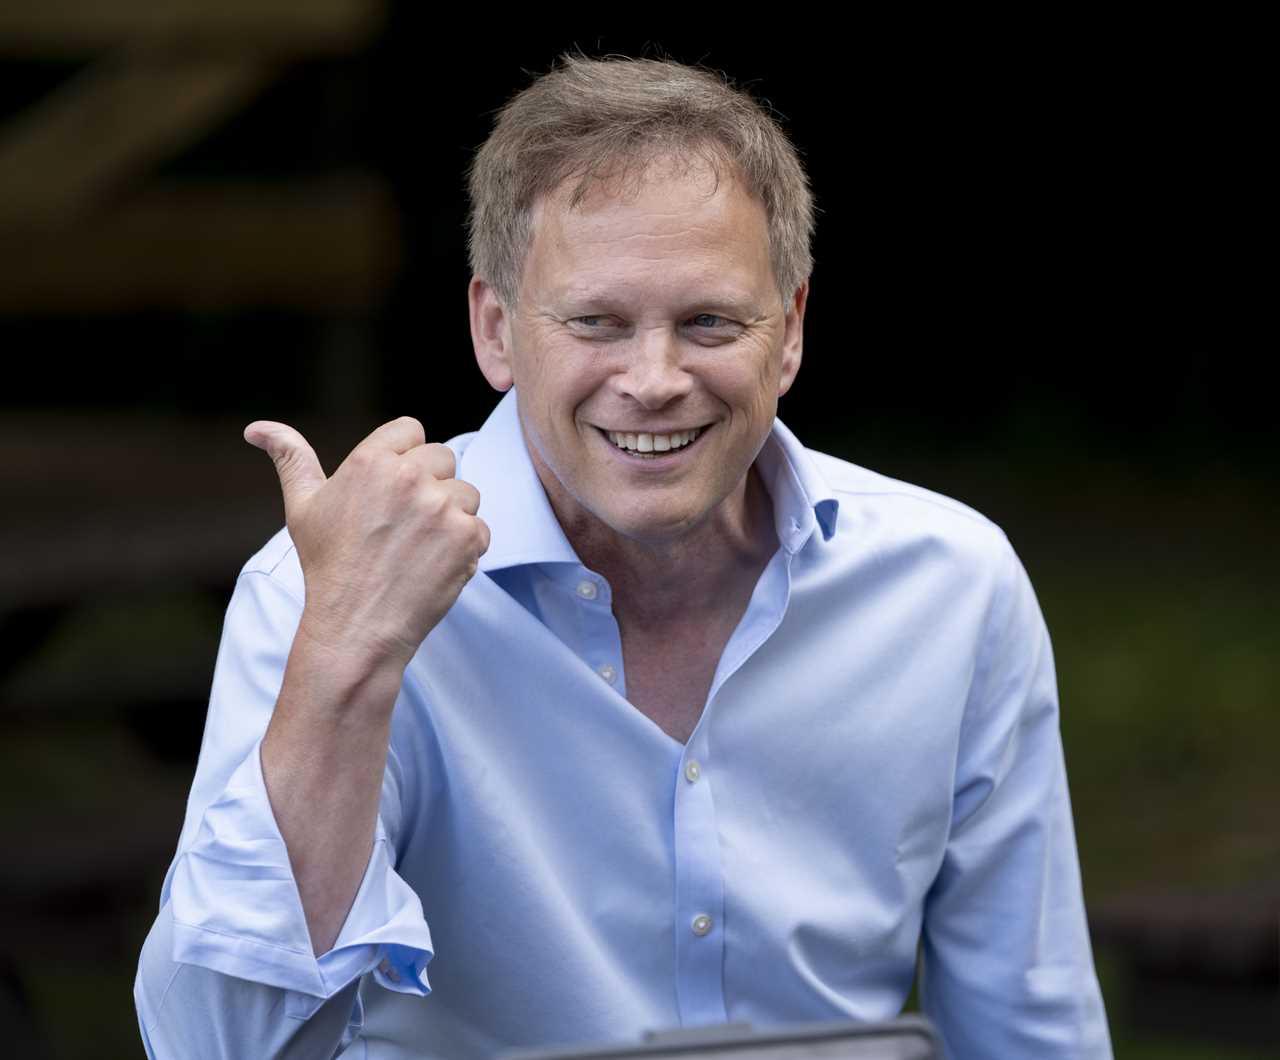 Labour's Trustworthiness with Britain's Nuclear Button Questioned by Grant Shapps